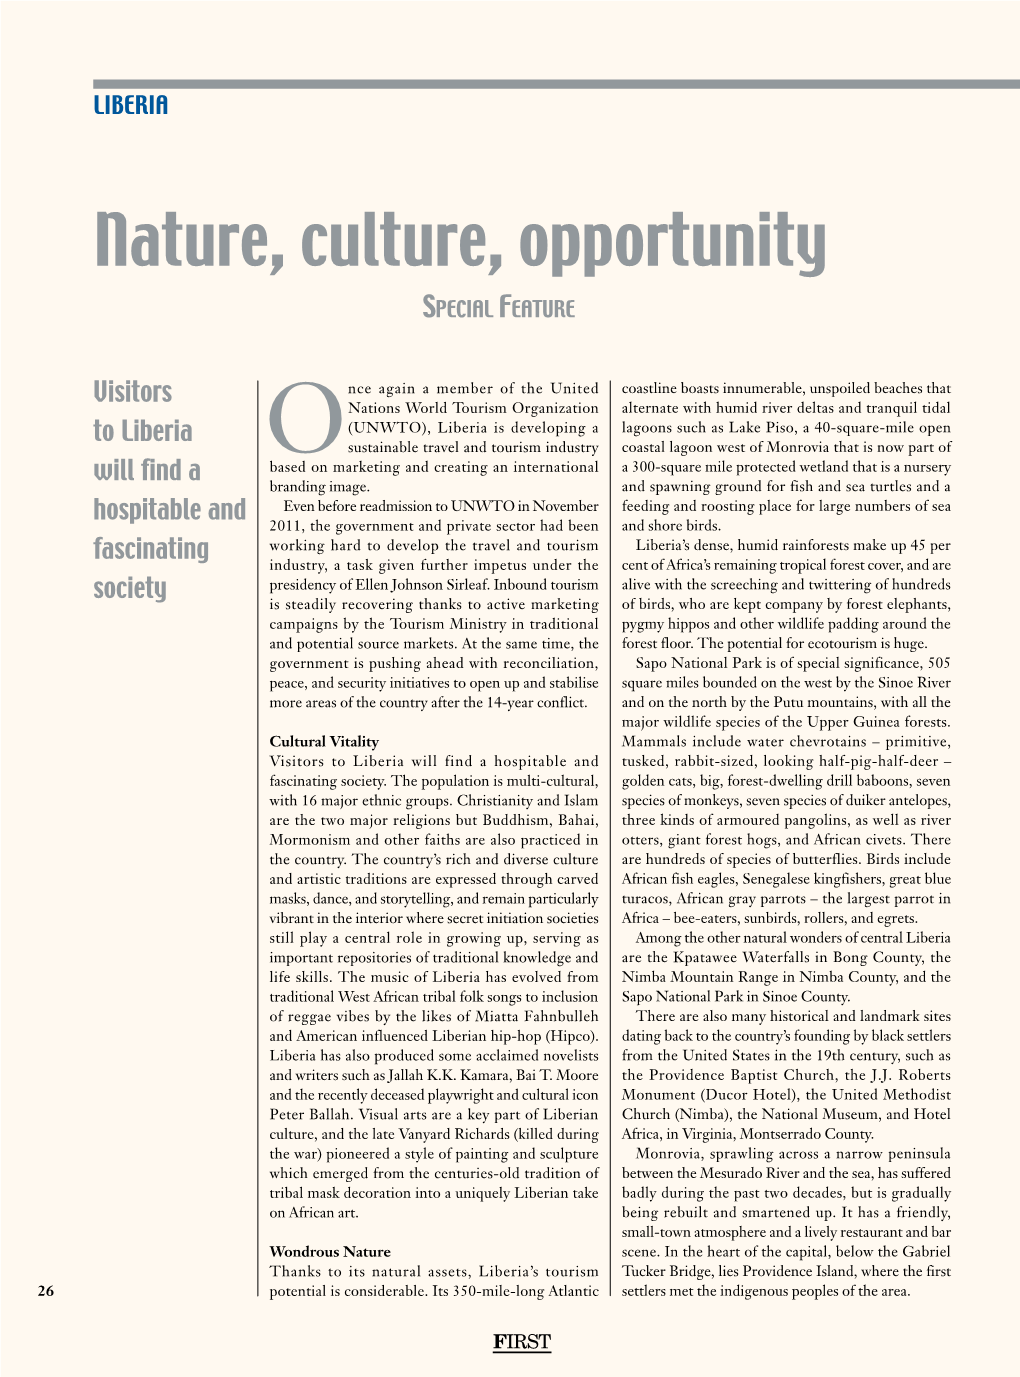 Nature, Culture, Opportunity Special Feature